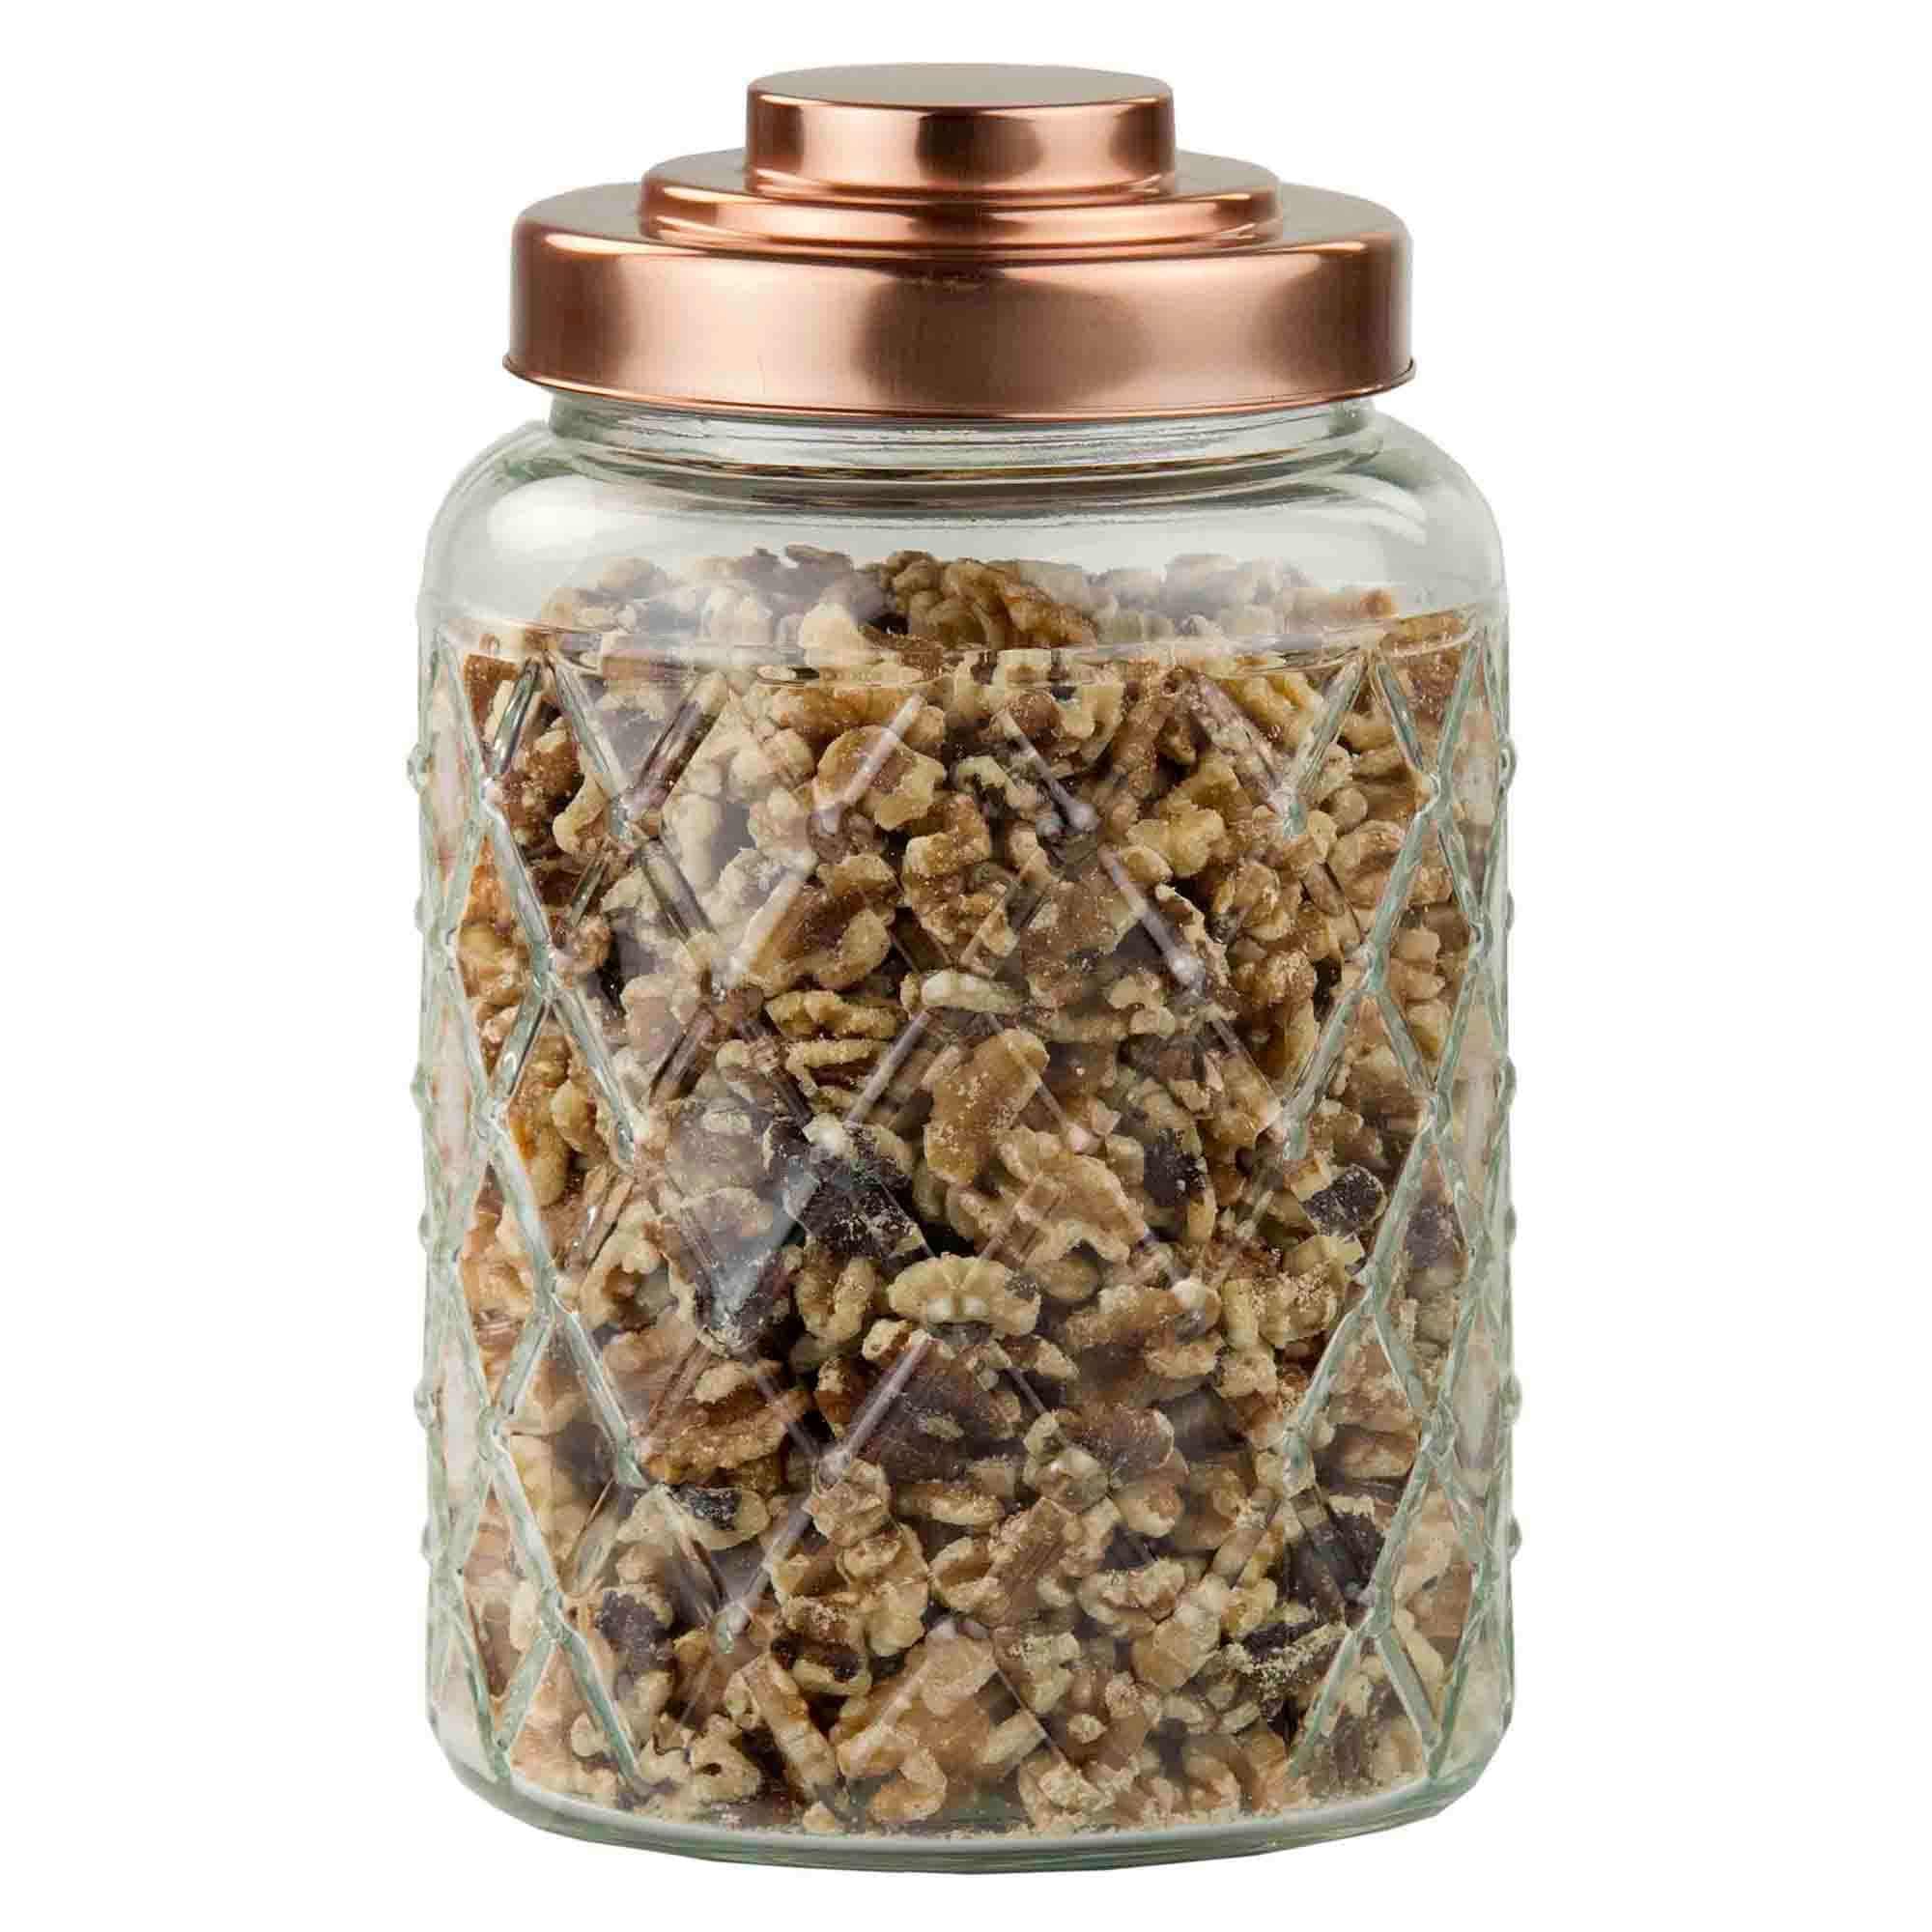 Home Basics Medium 3.4 Lt Textured Glass Jar with Gleaming Air-Tight Copper Top $6.00 EACH, CASE PACK OF 6